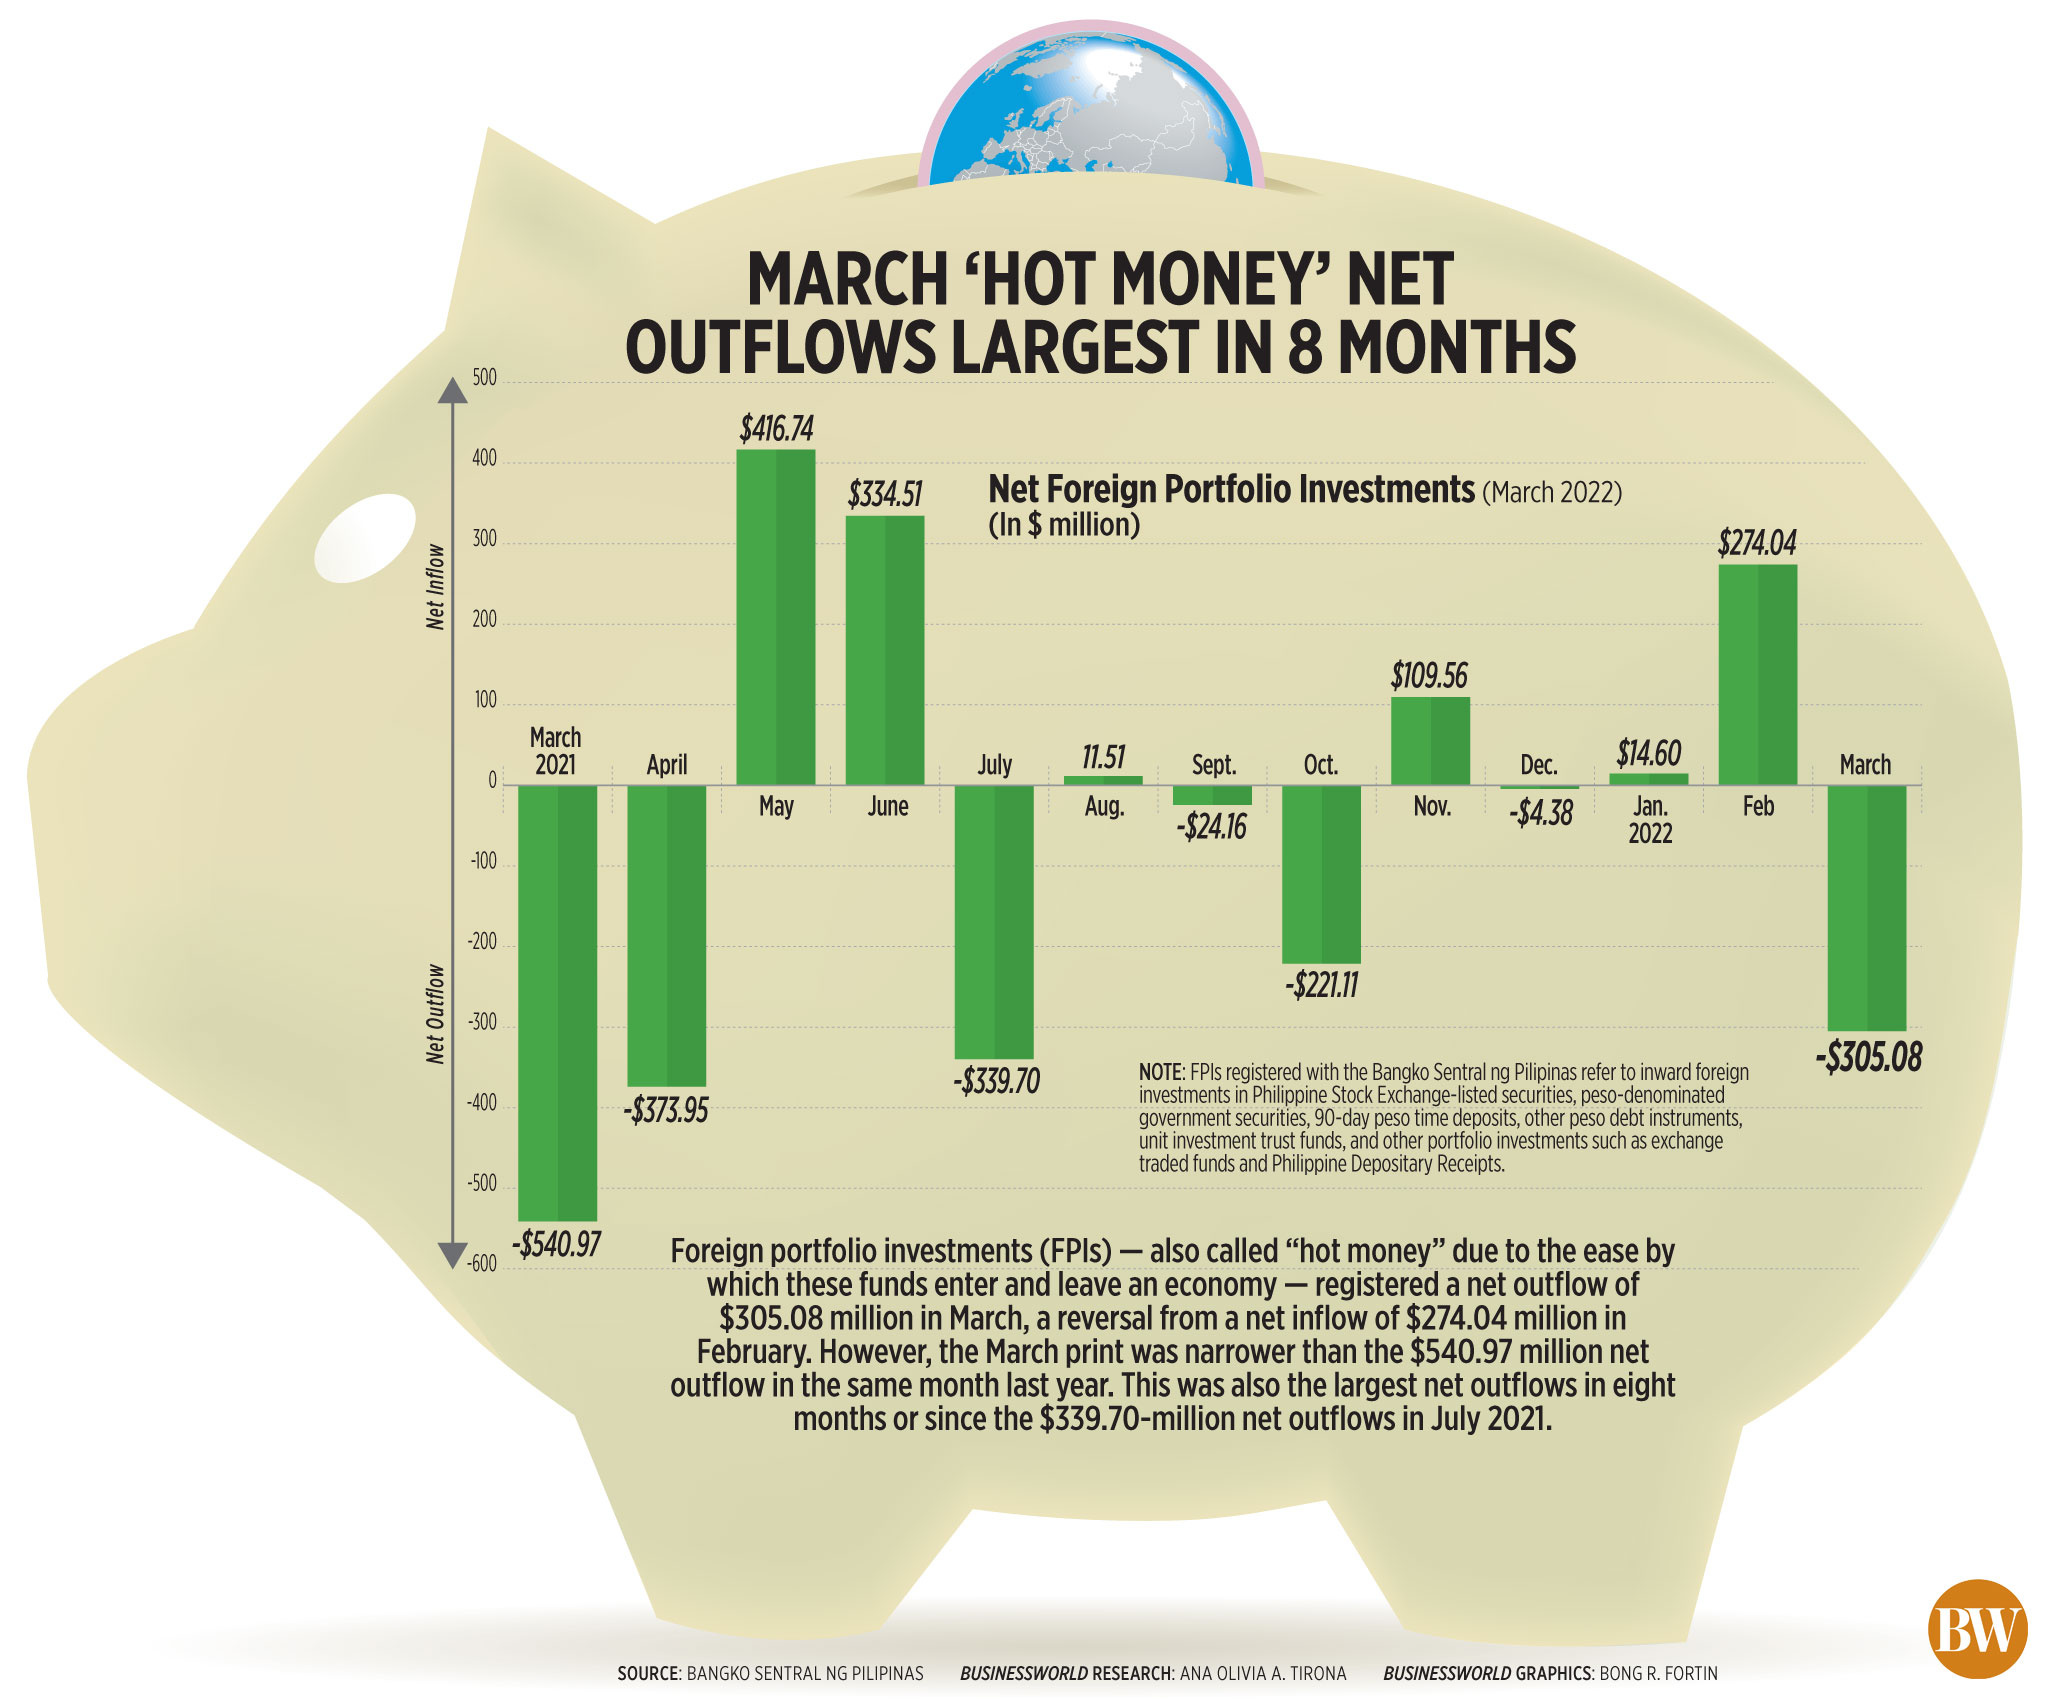 March 'hot money' net outflows largest in 8 months